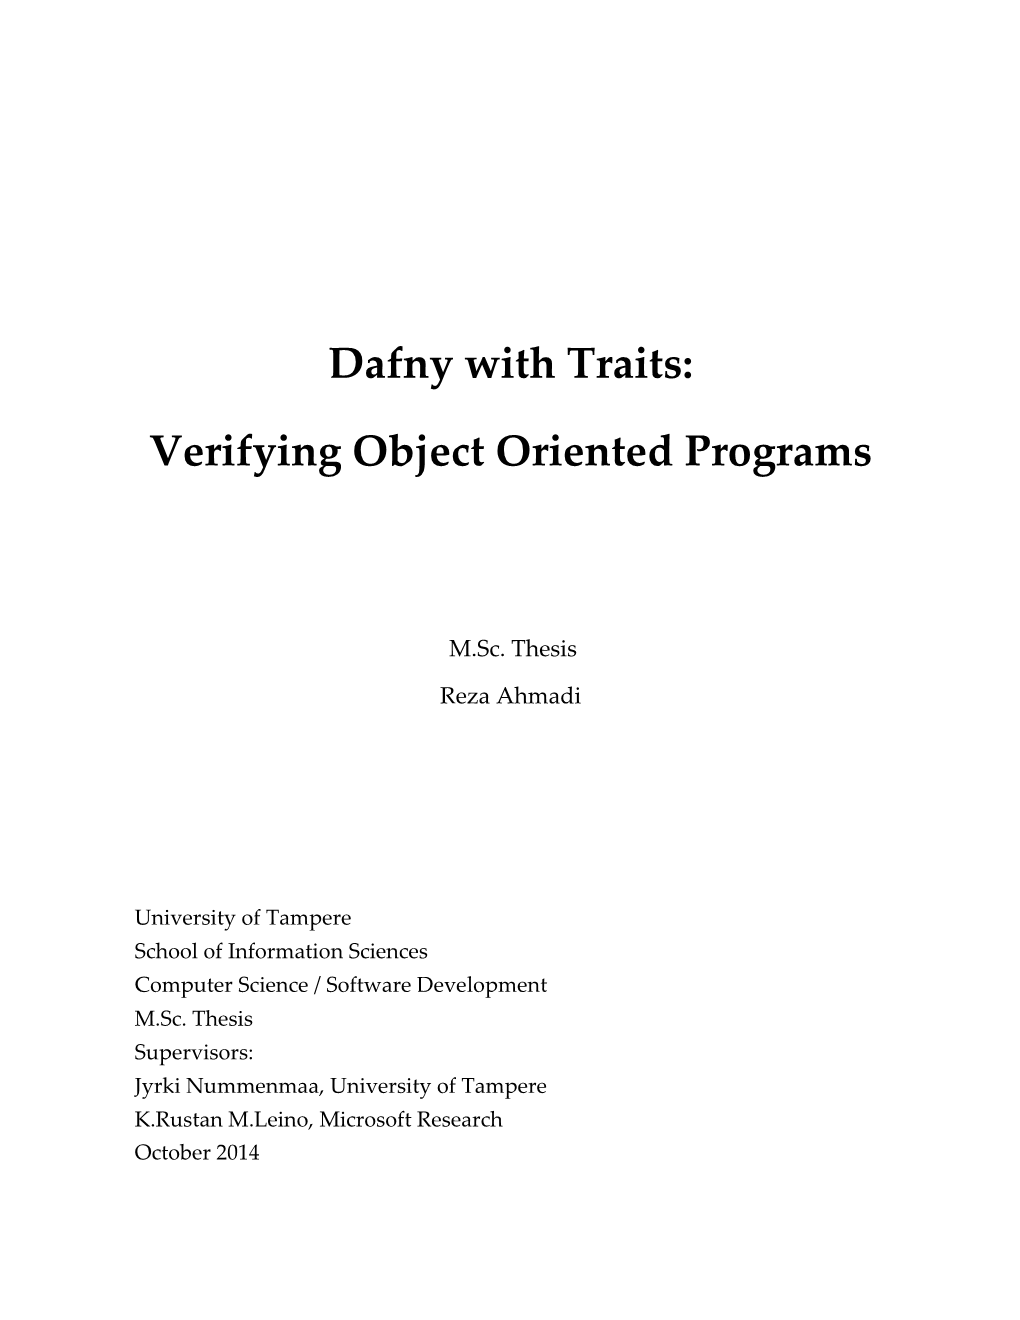 Dafny with Traits: Verifying Object Oriented Programs